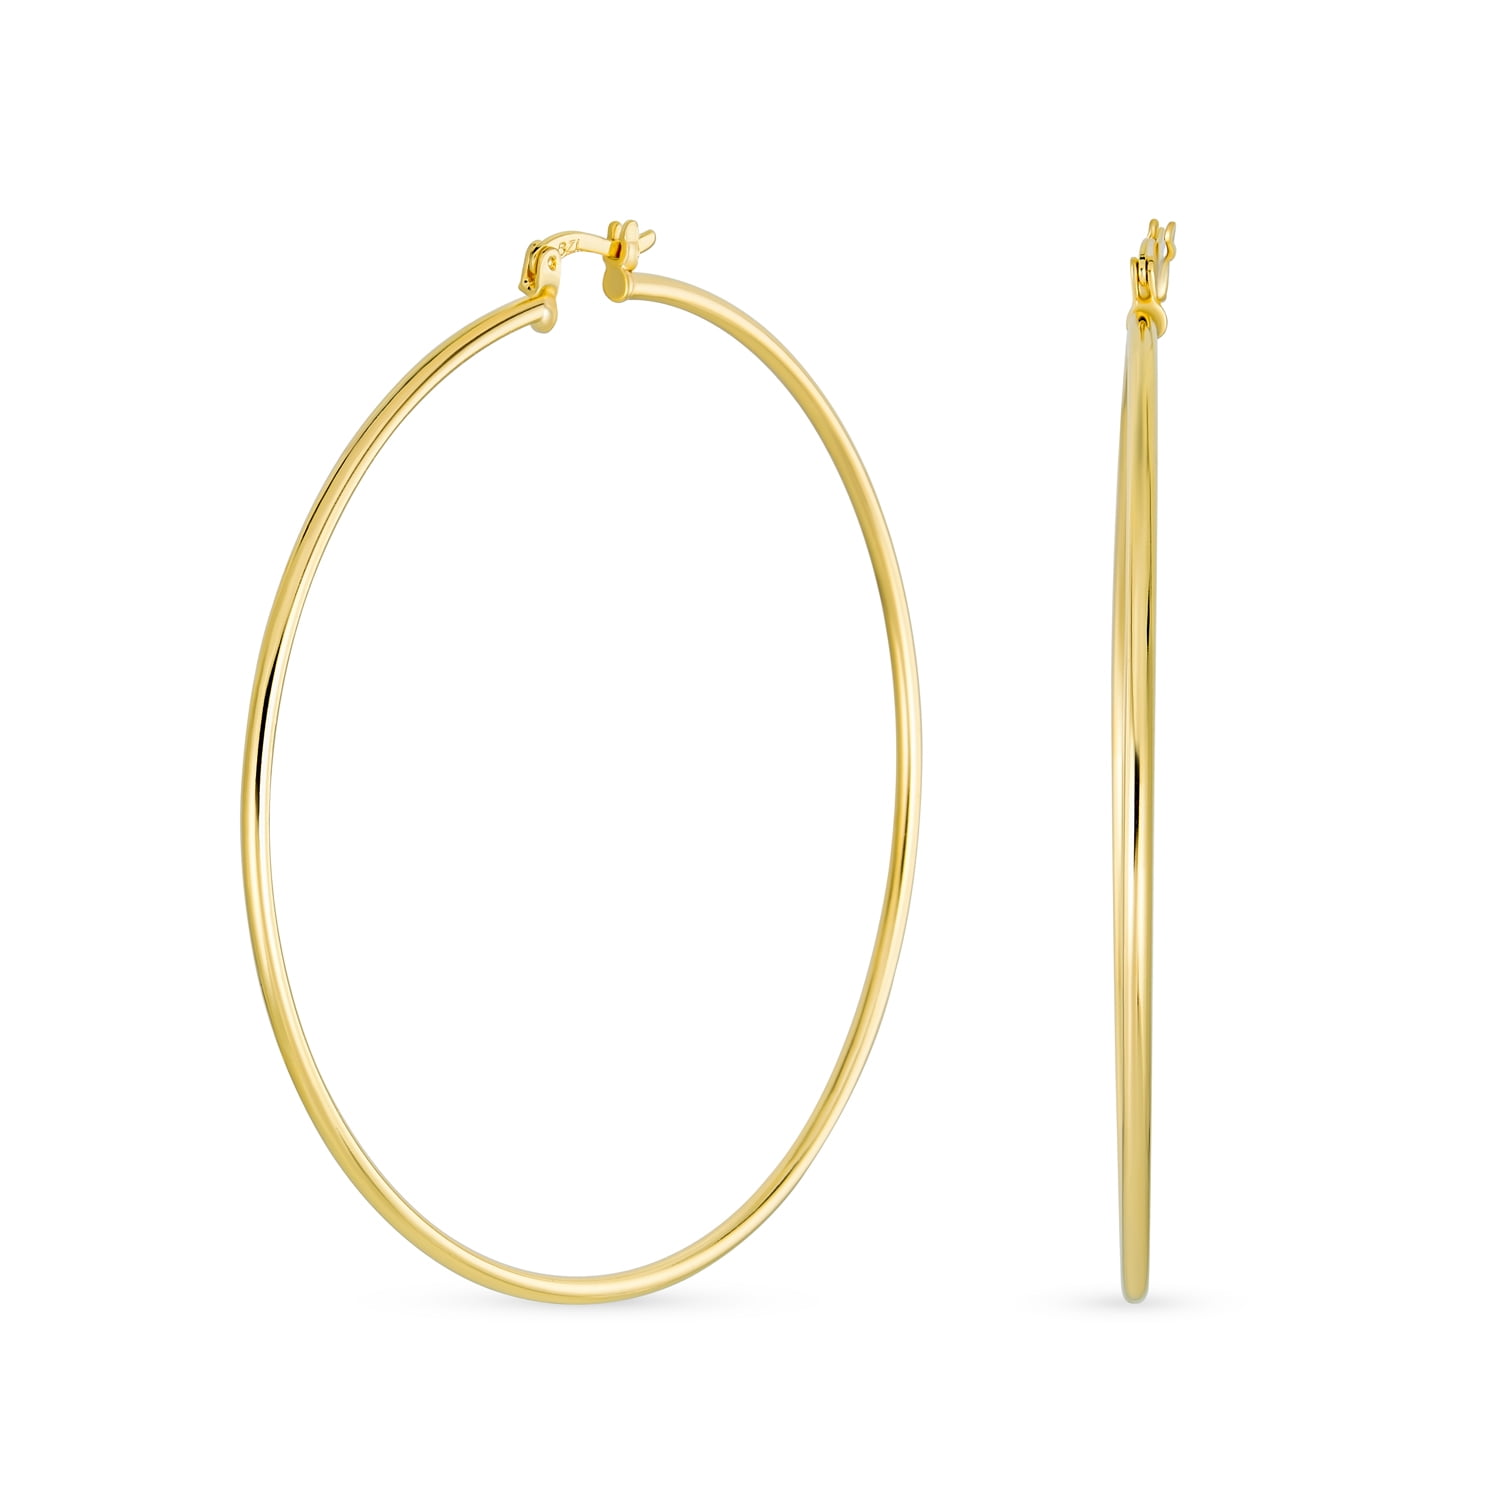 35mm Diameter Frosted Hoop Earring 9k Yellow Gold For Special Occassion